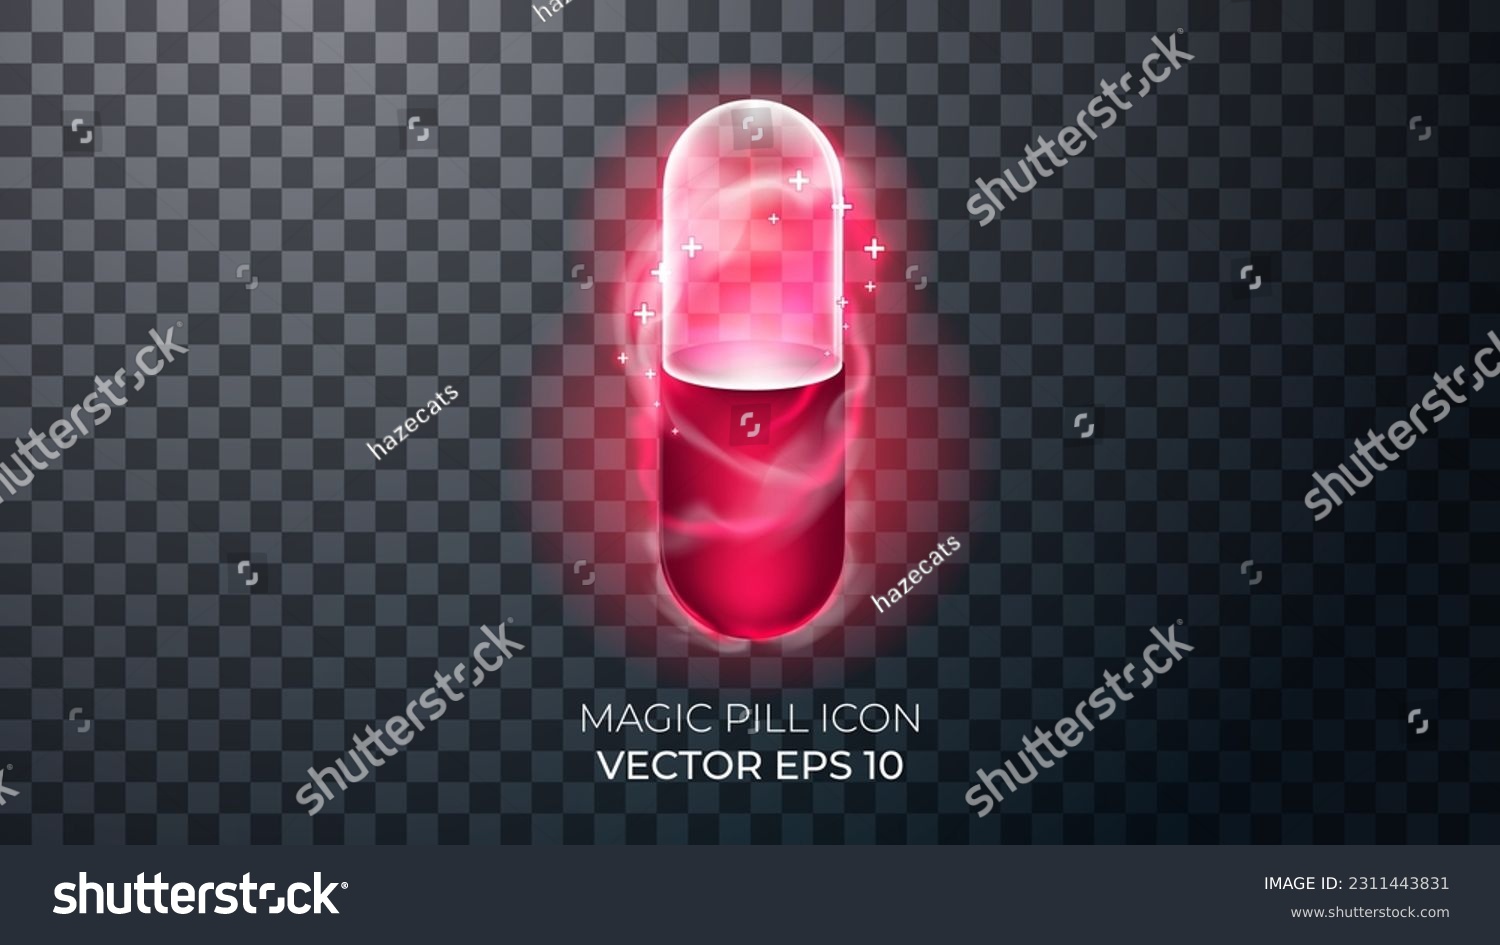 SVG of Red magic pill image 3d realistic render. Waves of magical smoke wrap around the pill. Decor elements for magic doctor, shaman, medium. Transparent background. svg